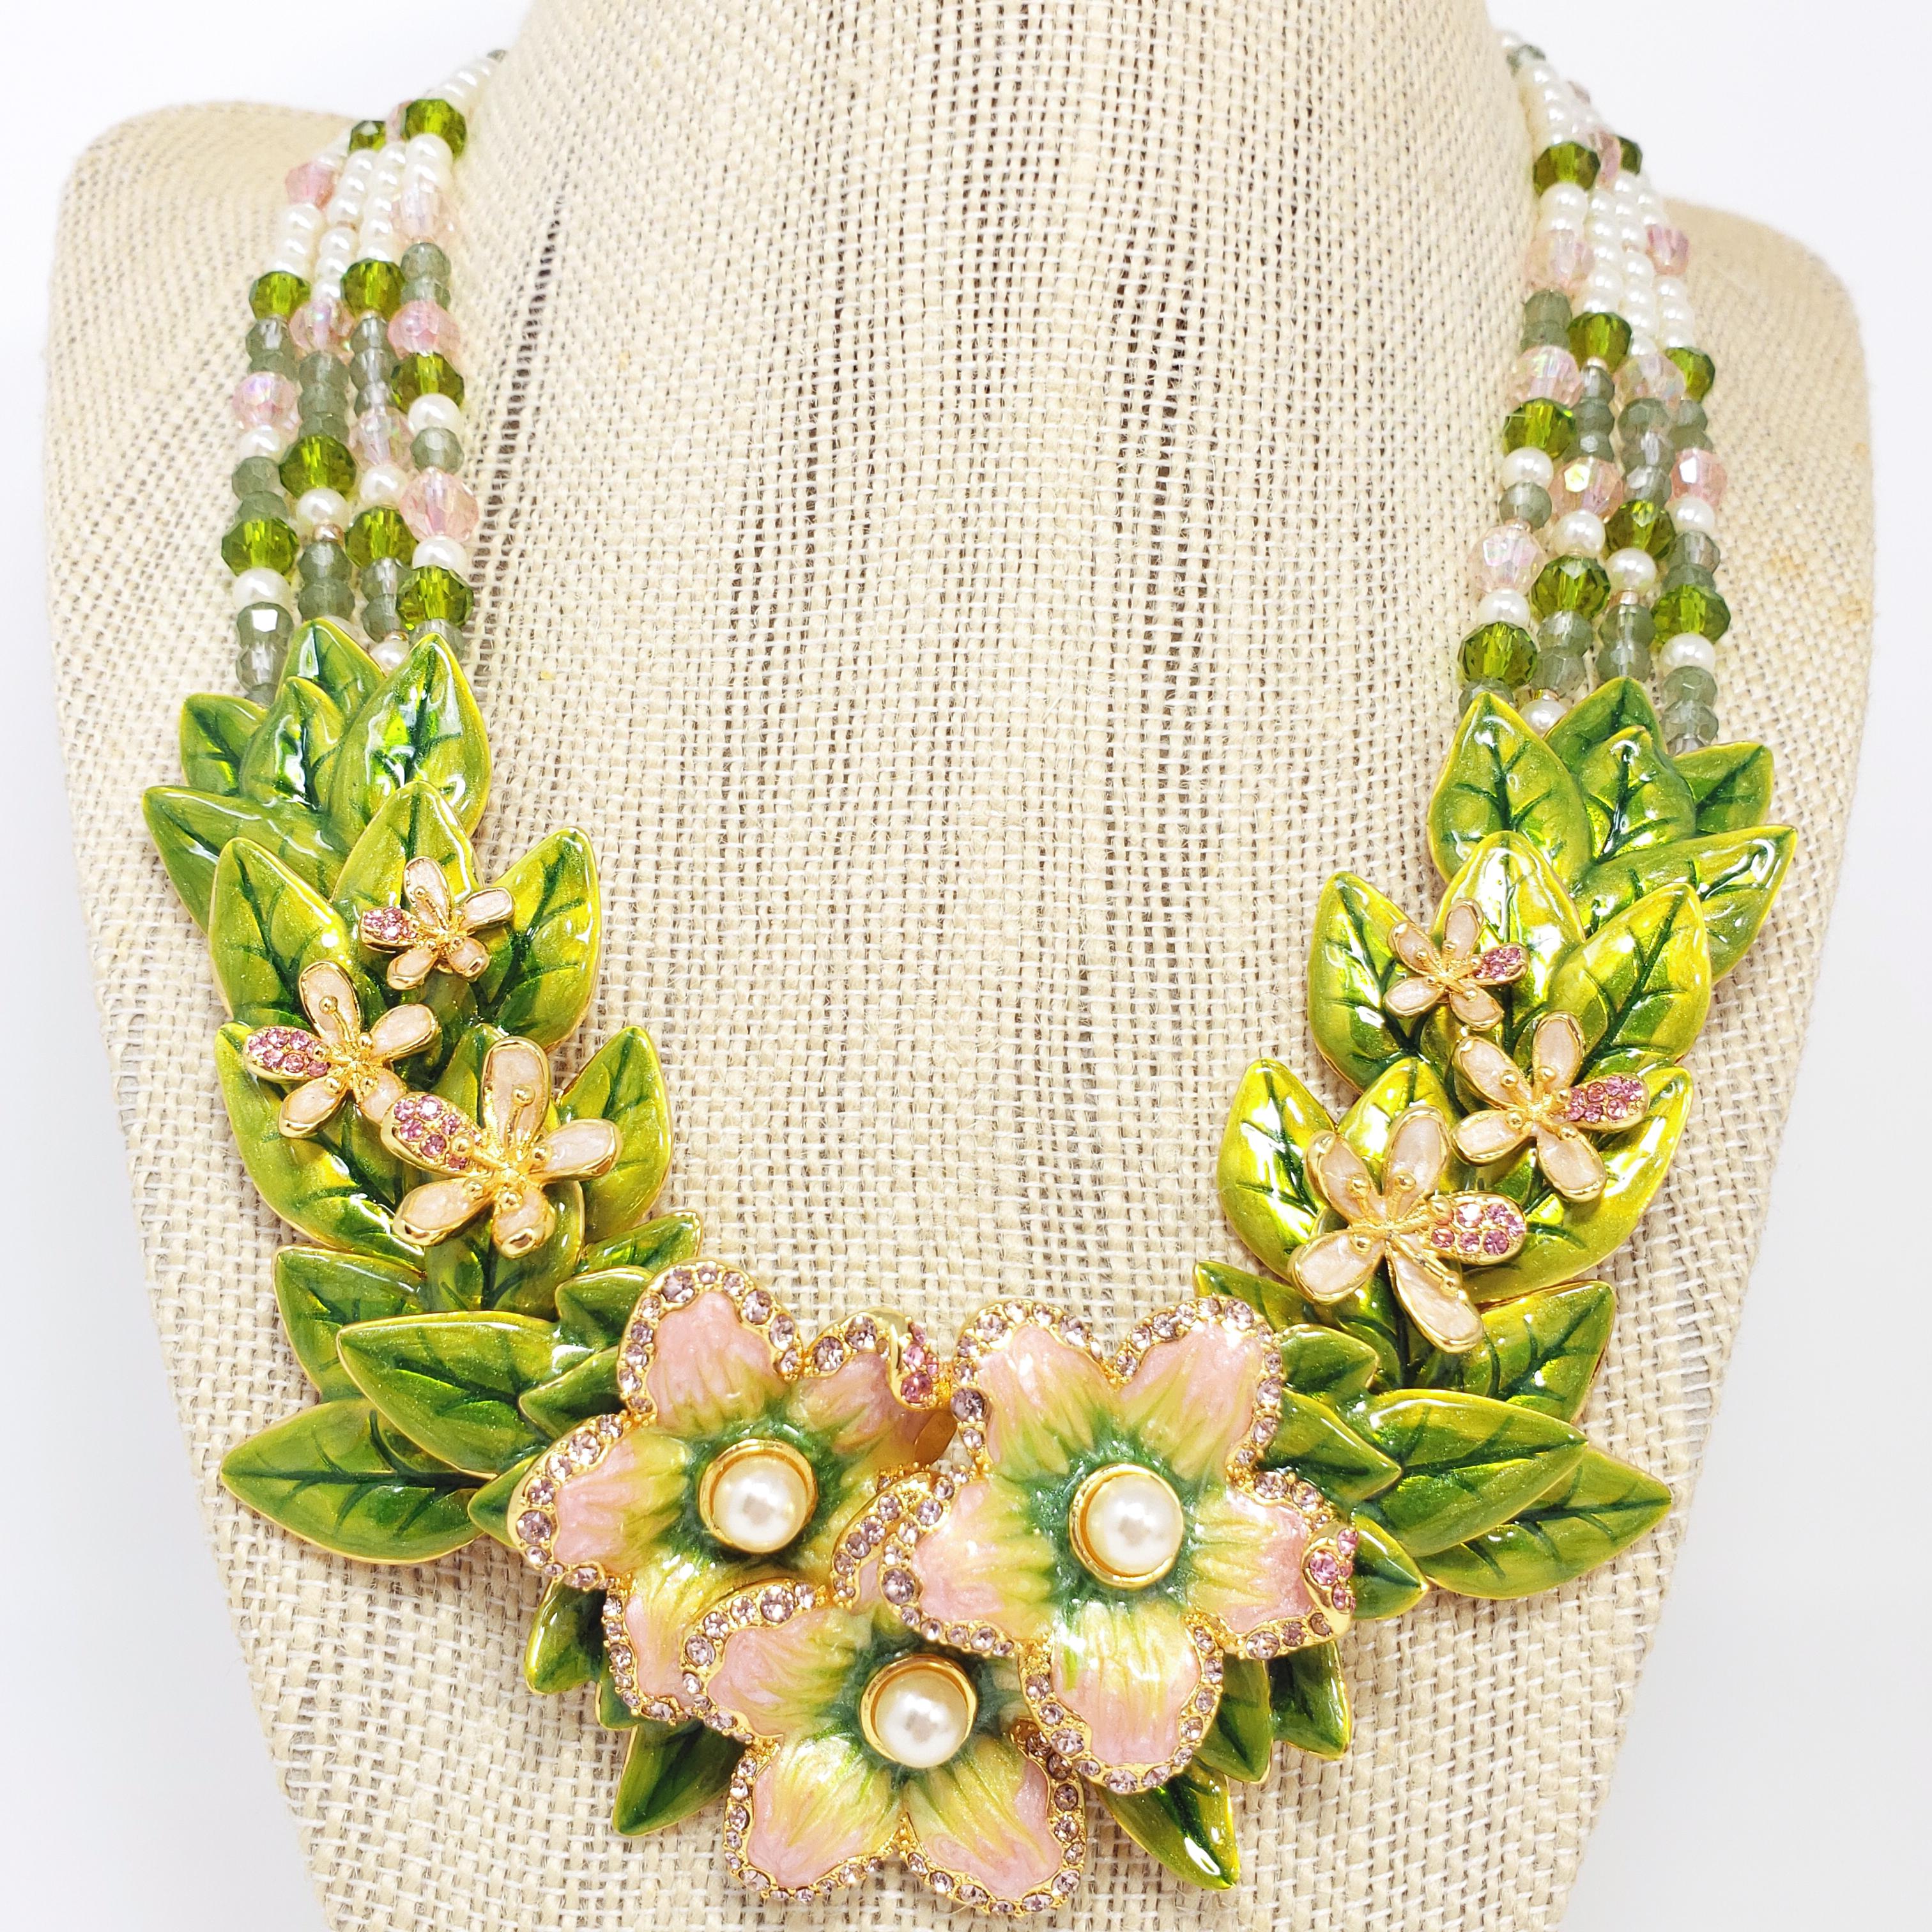 Flower power! An ornate floral necklace featuring green and pink crystals & faux pearls on multiple strands. Layered segments of enameled leaves and flowers accented with crystals and faux pearls sit at the center.

Dimensions: Length 49 cm,